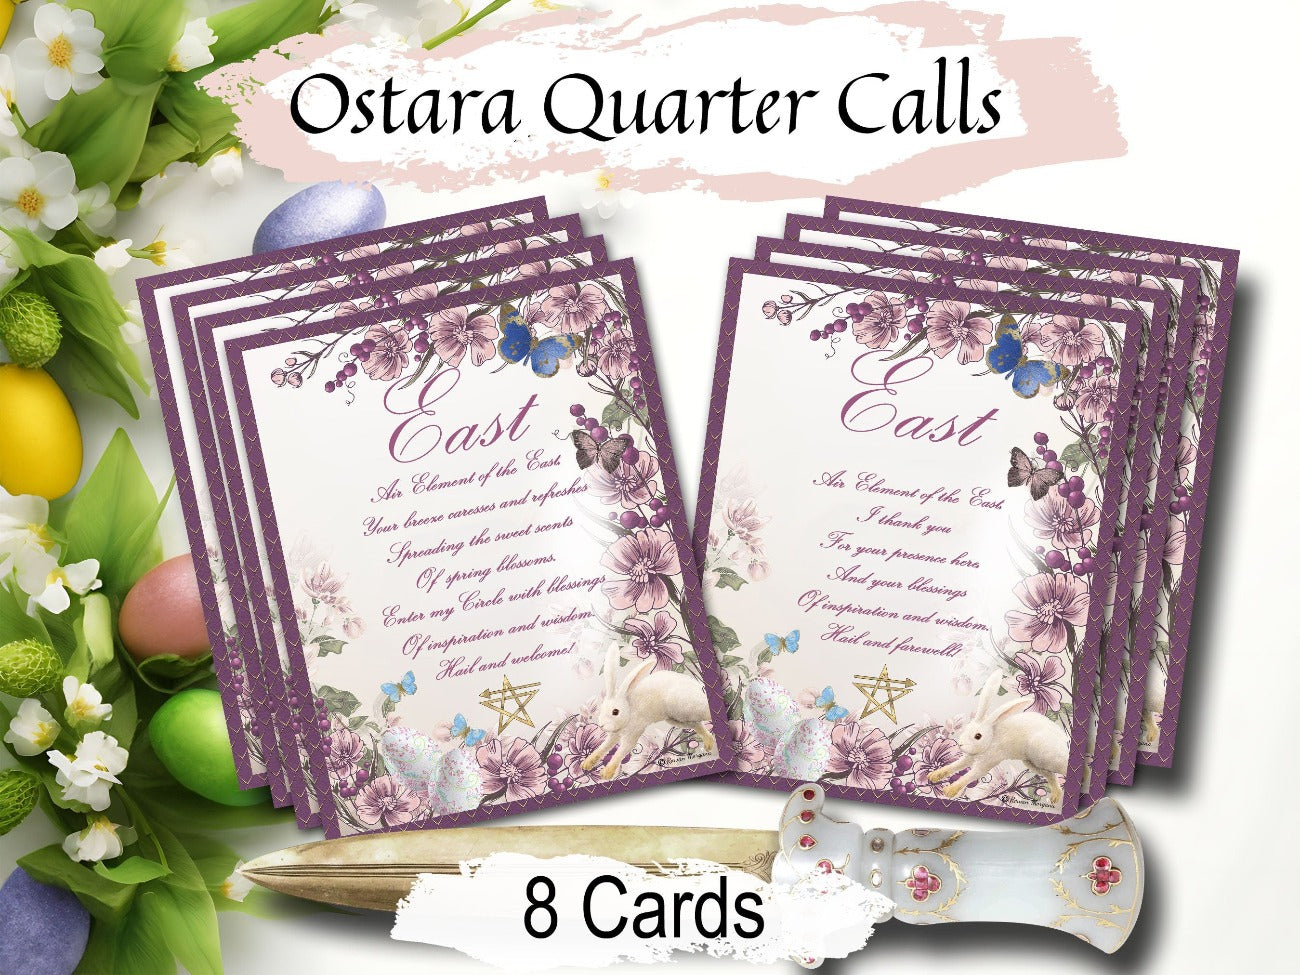 OSTARA CALL the QUARTERS, 8 Cards, Call the Directions, Wicca Magic Circle, Make Sacred Space, Sabbat Ritual Witchcraft, Elements Invocation - Morgana Magick Spell